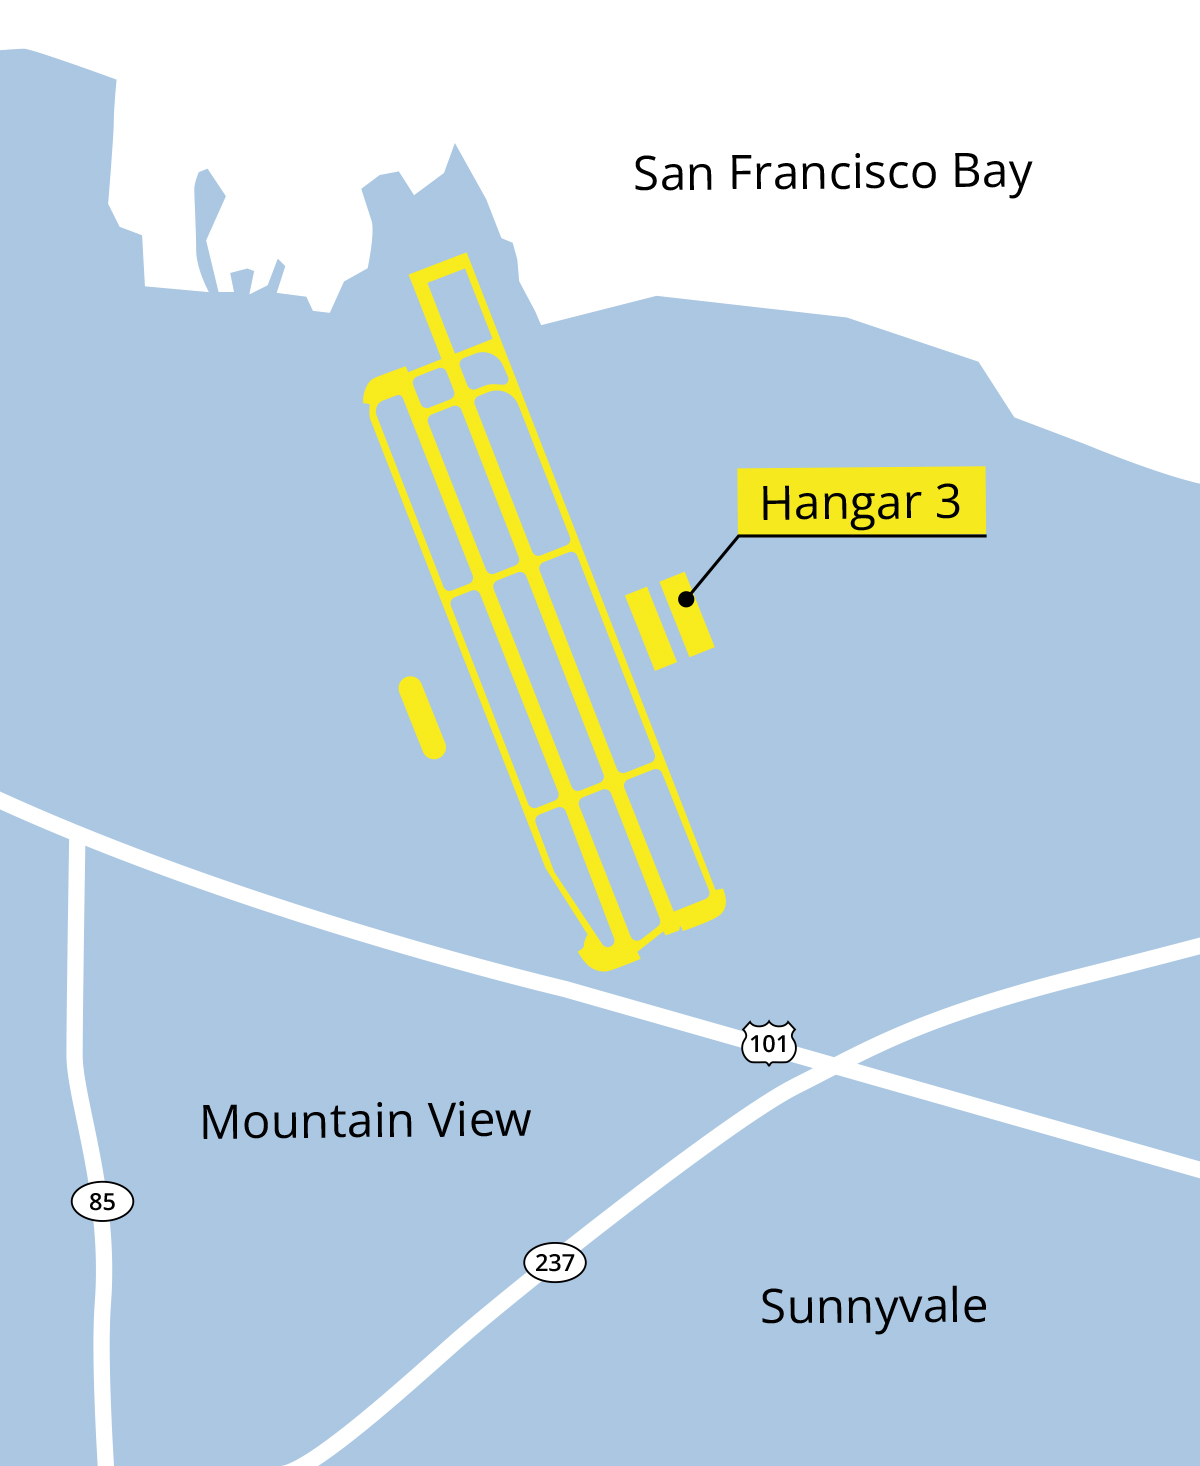 A map identifying Moffett Field and Hangar 3, the San Francisco Bay, the cities of Mountain View and Sunnyvale, and the 101, 237, and 85 highways.